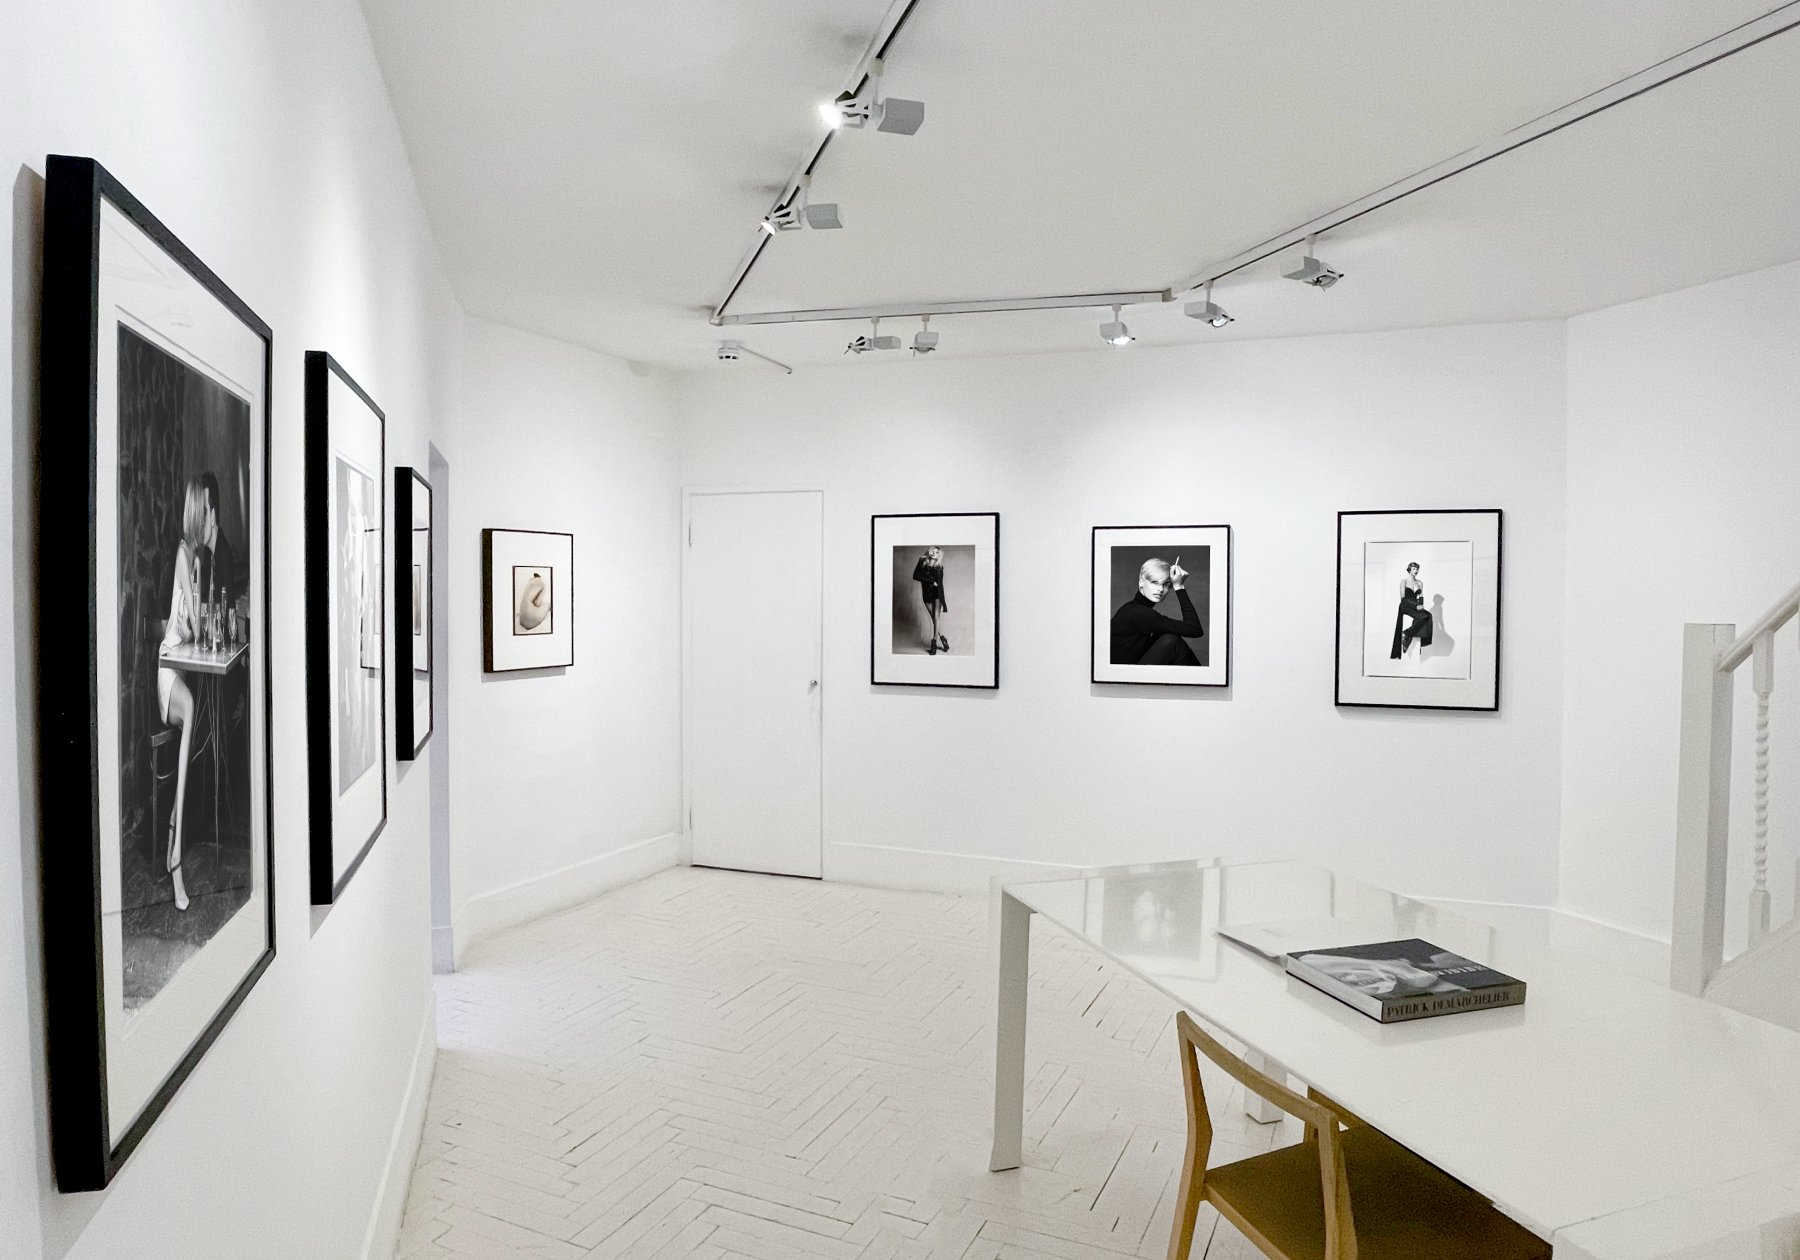 Installation image for Patrick Demarchelier: Legacy, at ATLAS Gallery